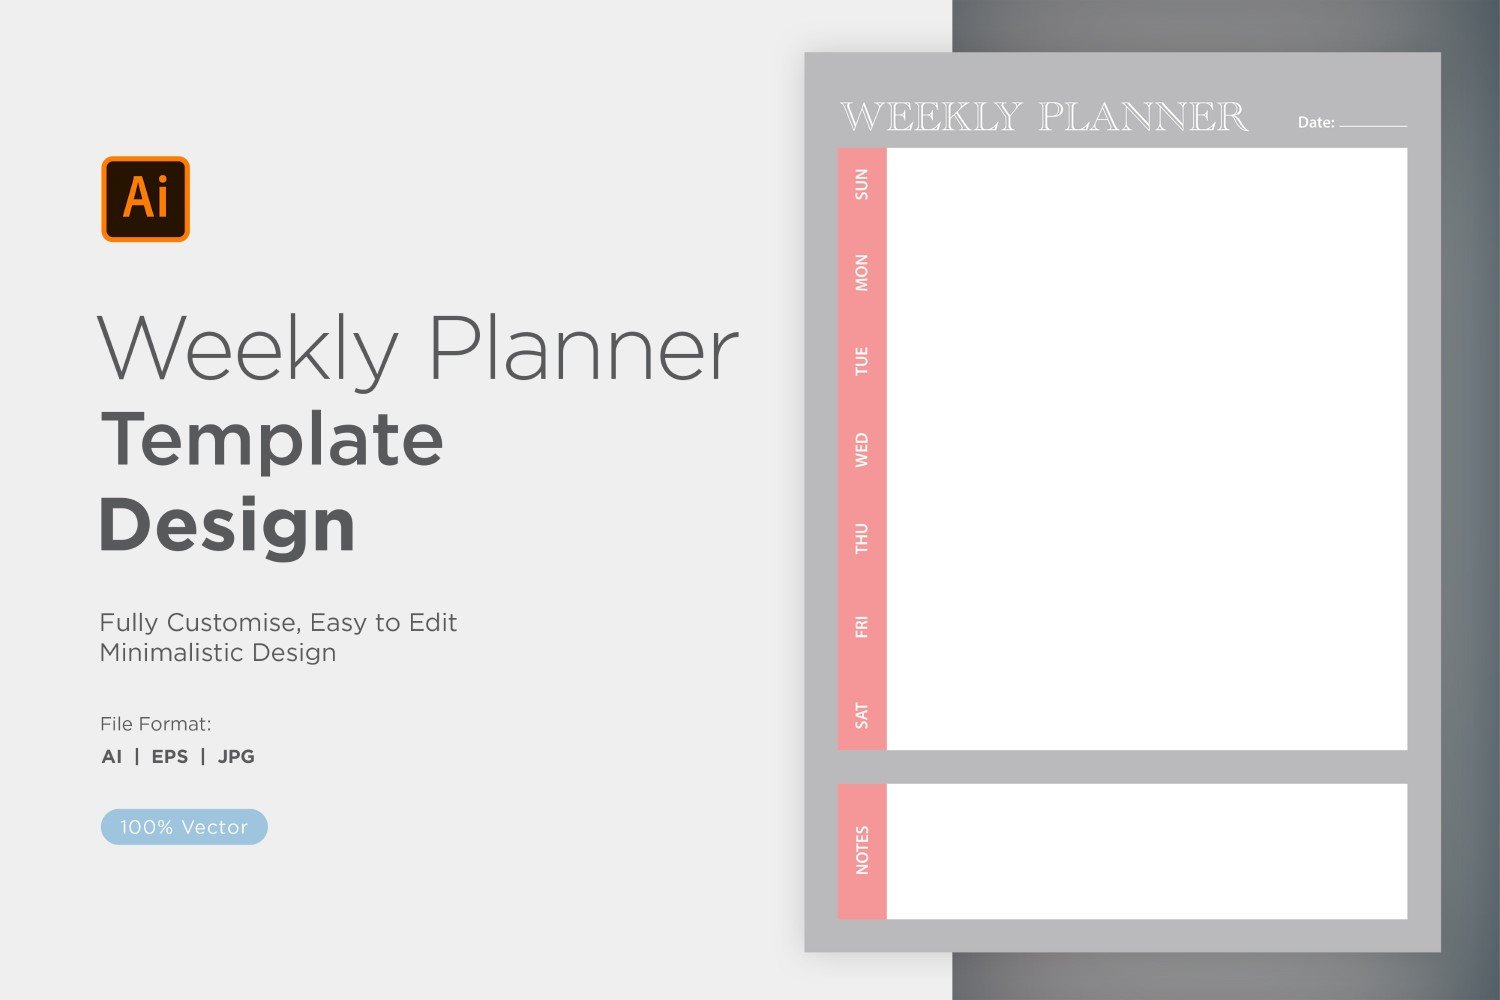 Kit Graphique #357863 Weekly Planner Divers Modles Web - Logo template Preview